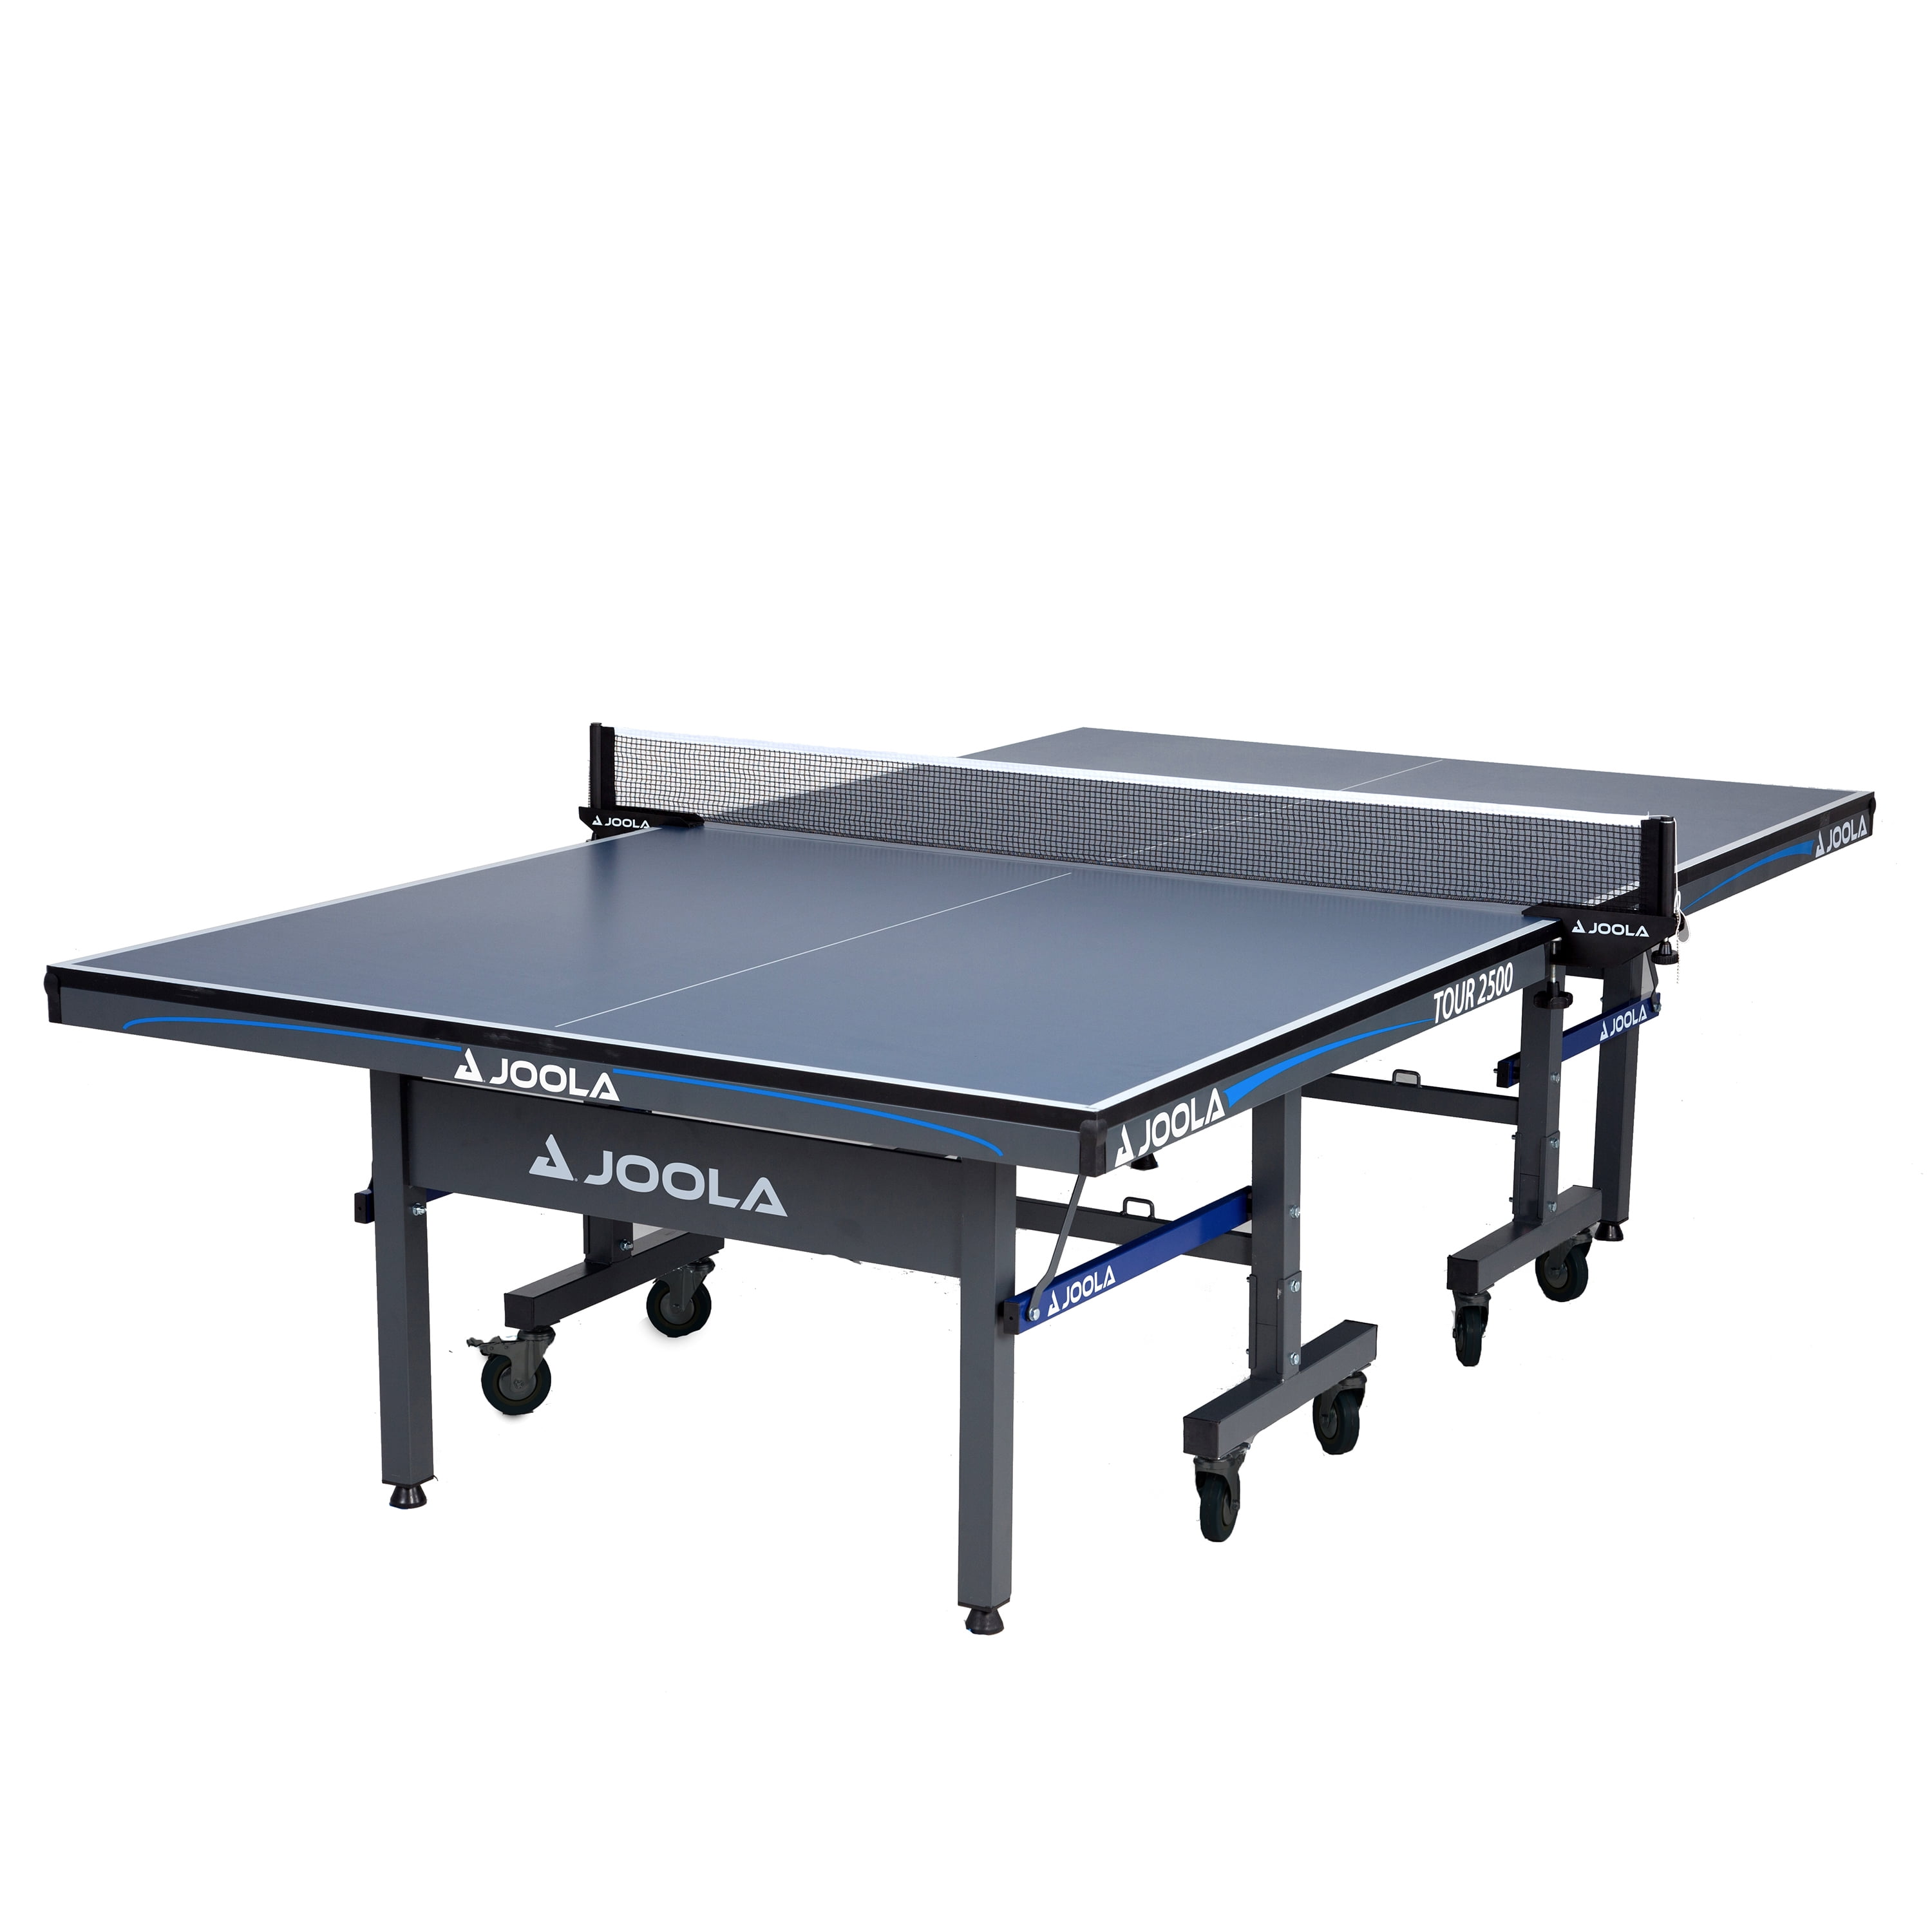 with Ping Tennis Table 18mm, 9\' Pong Blue Table x Tour JOOLA Net 5\', 1800 Set,